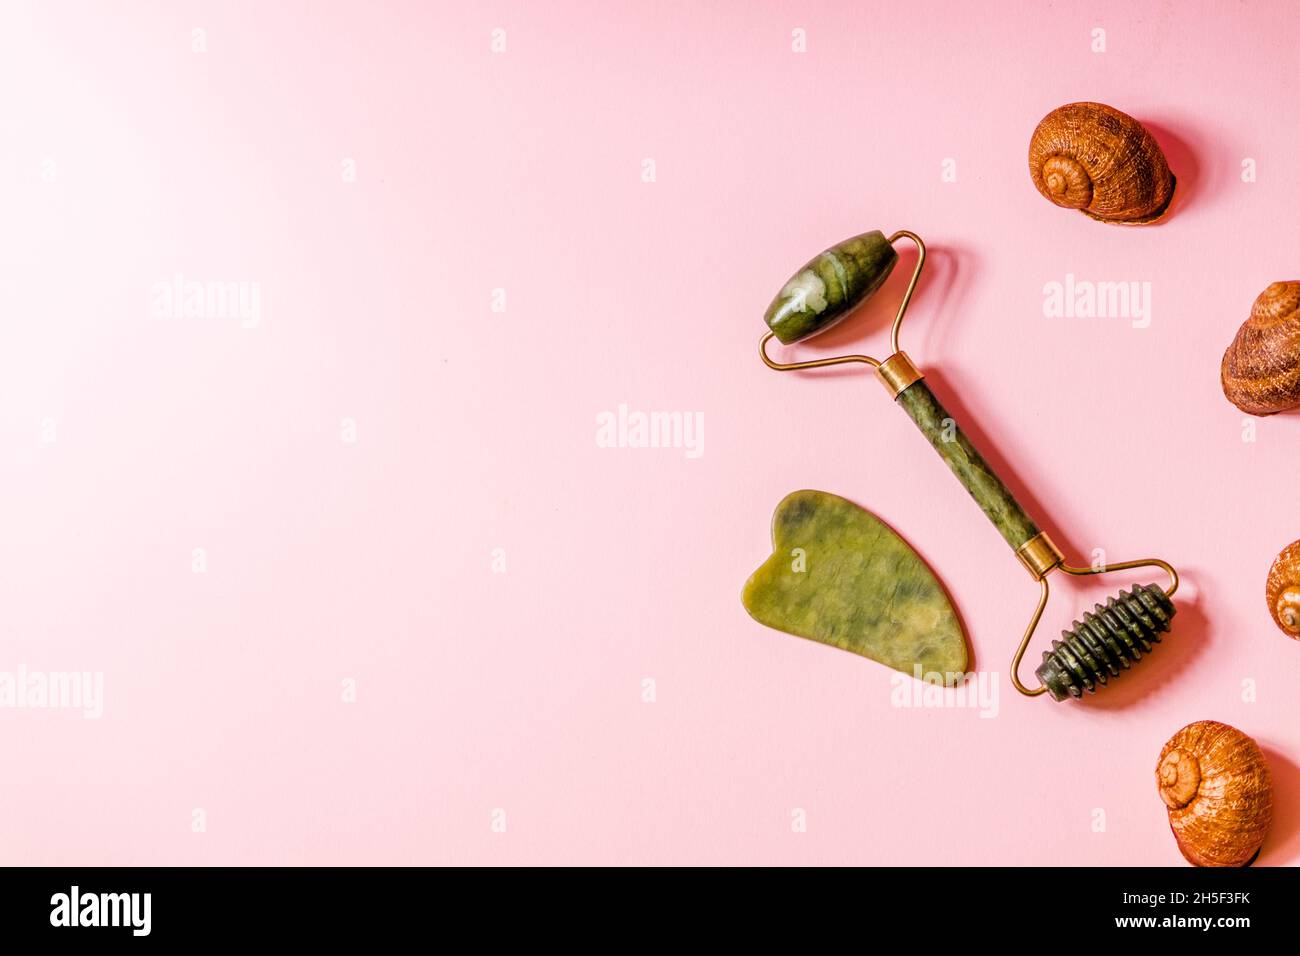 A green jade roller and facial massage scrubber lie on a soft pink background. Stock Photo